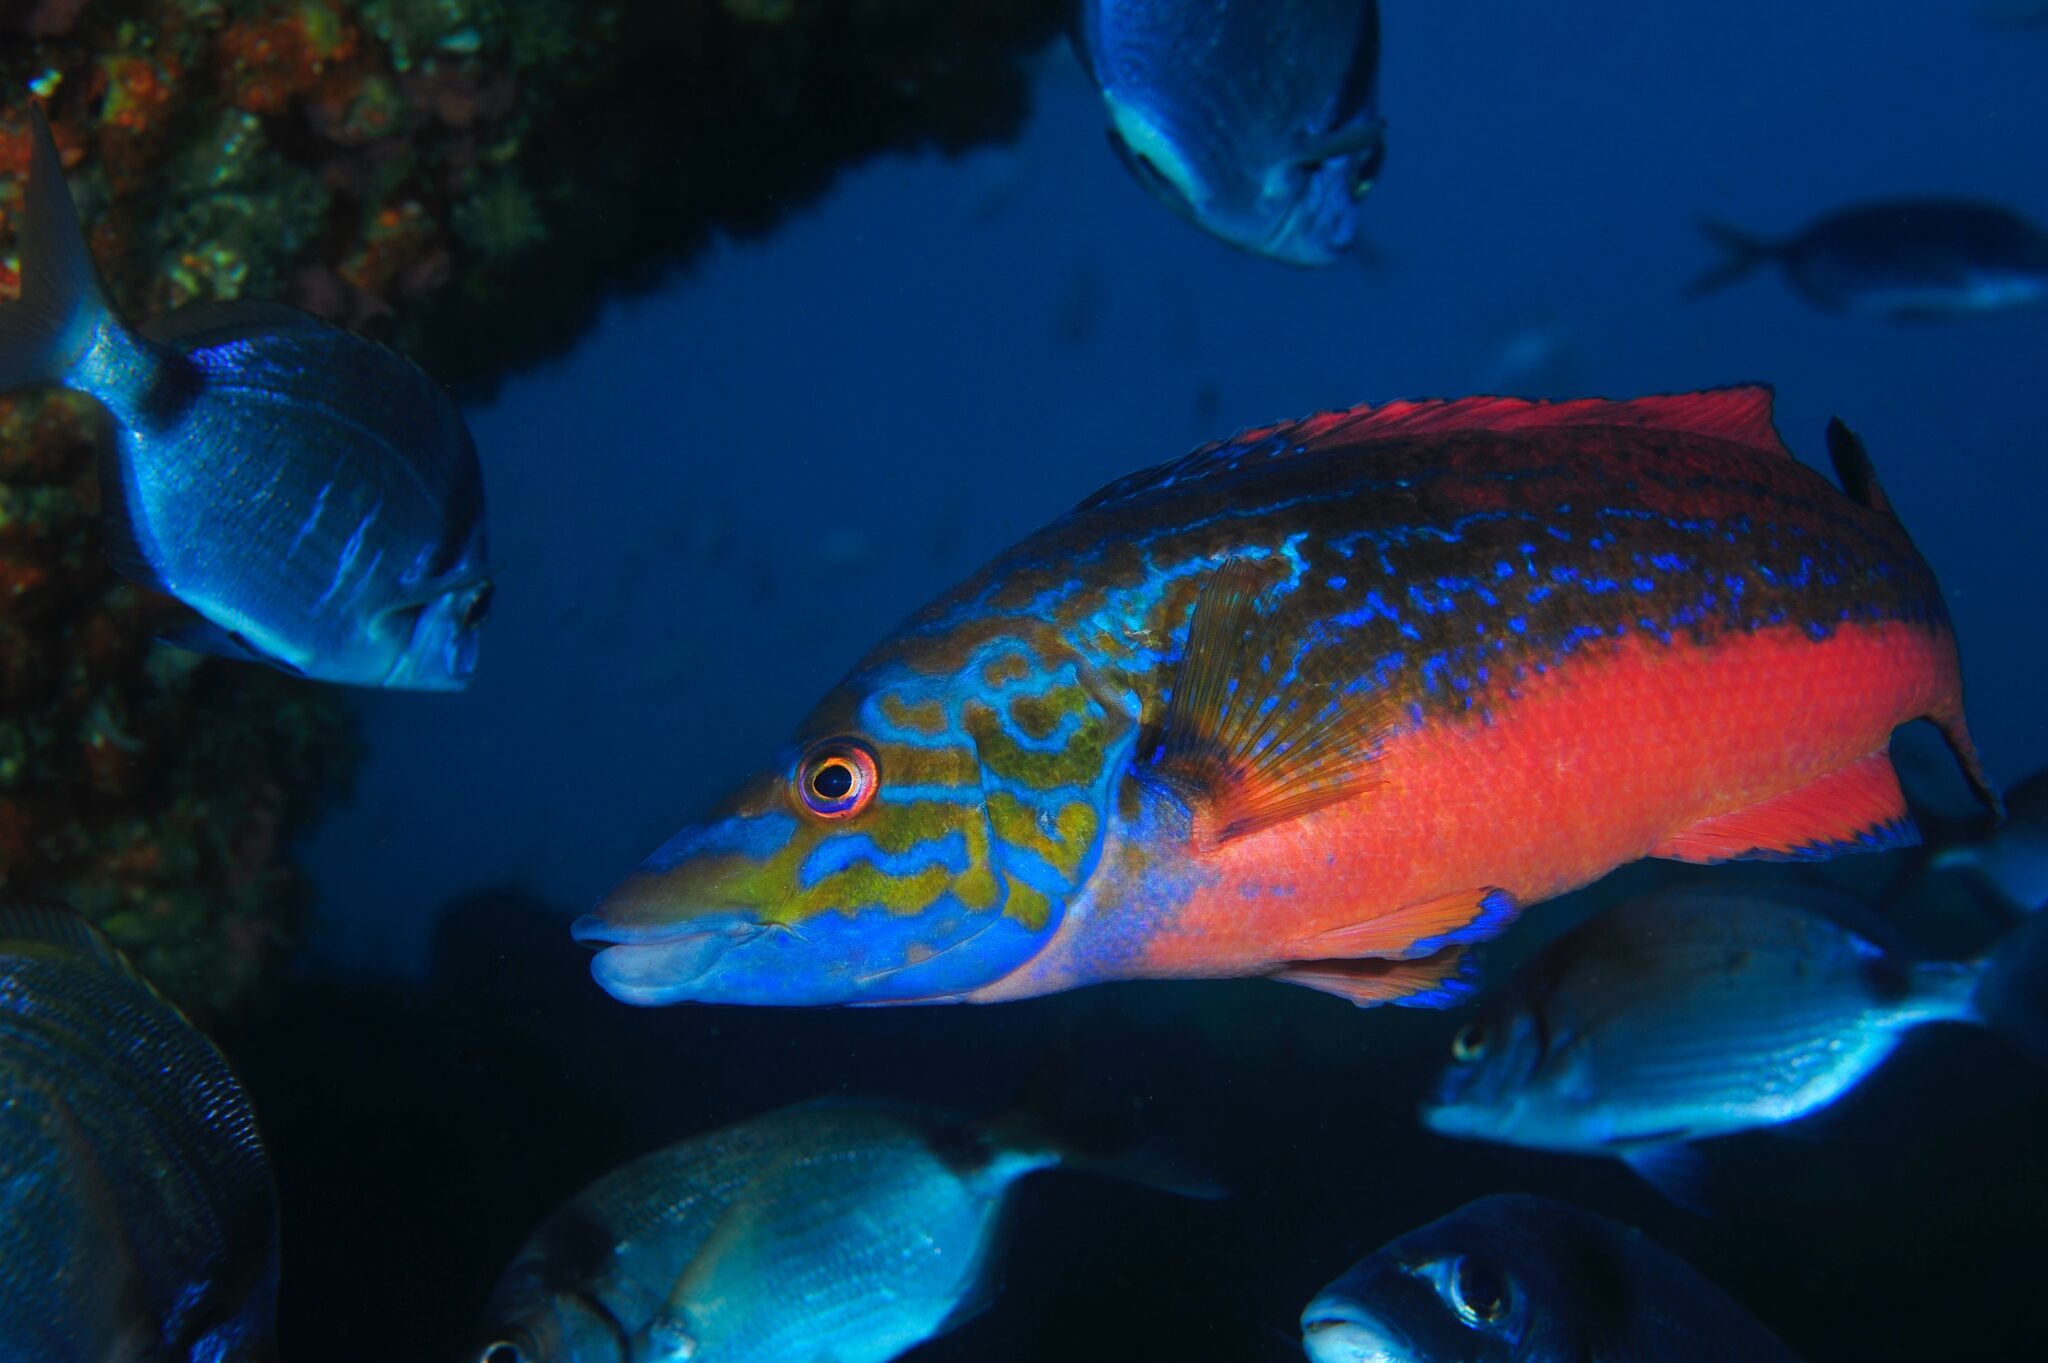 A cuckoo wrasse swims through an underwater cave in the UK